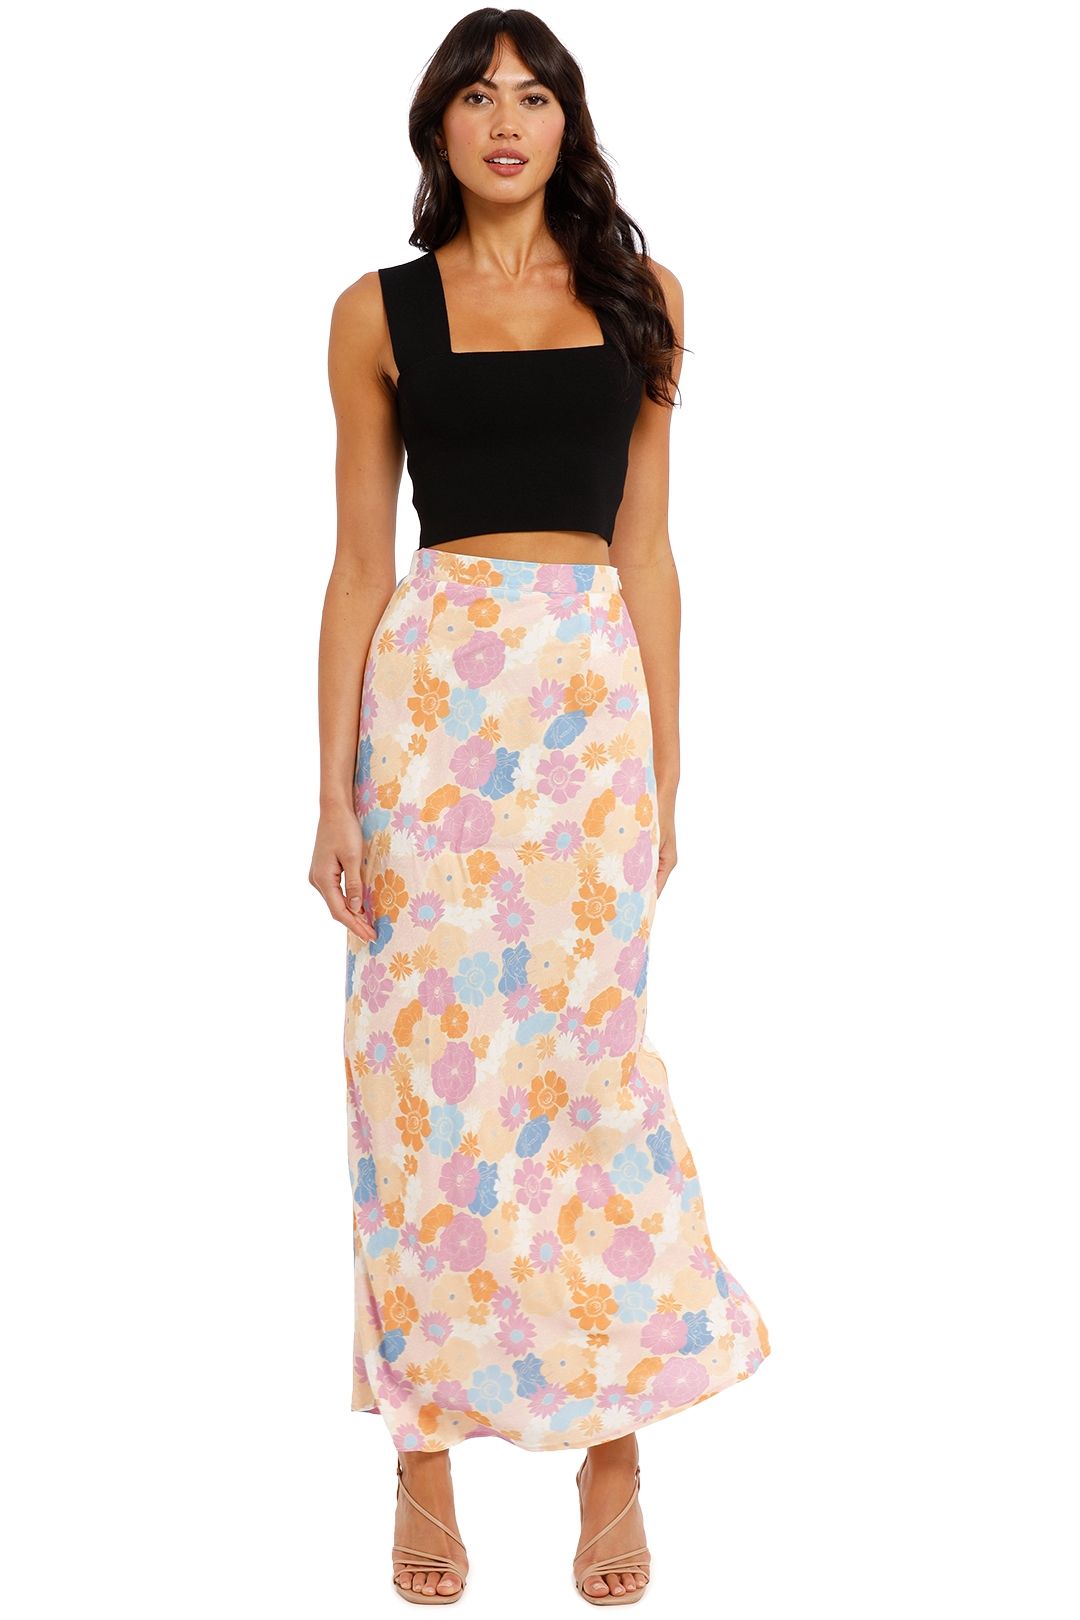 Charlie Holiday Emily Skirt Floral Cove High Waisted